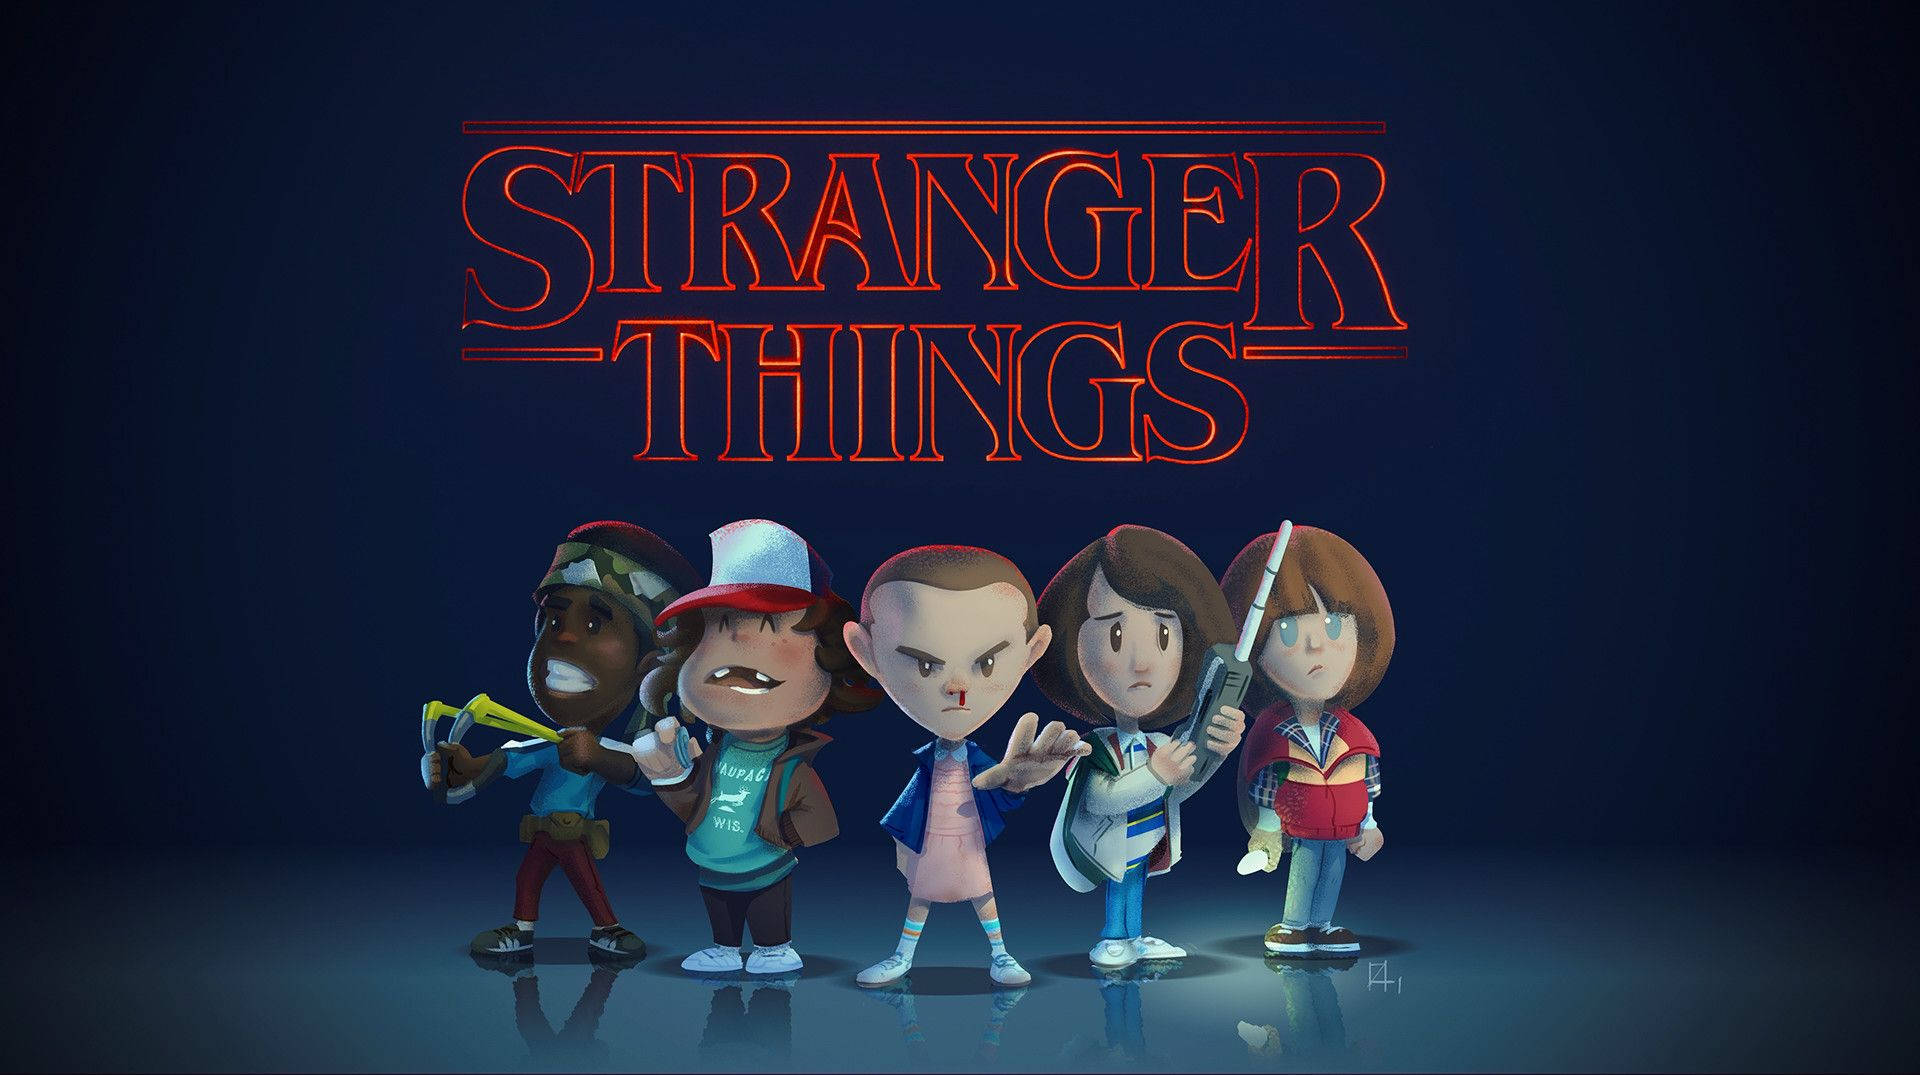 Stranger Things can be made exciting by Netflix's Game Director